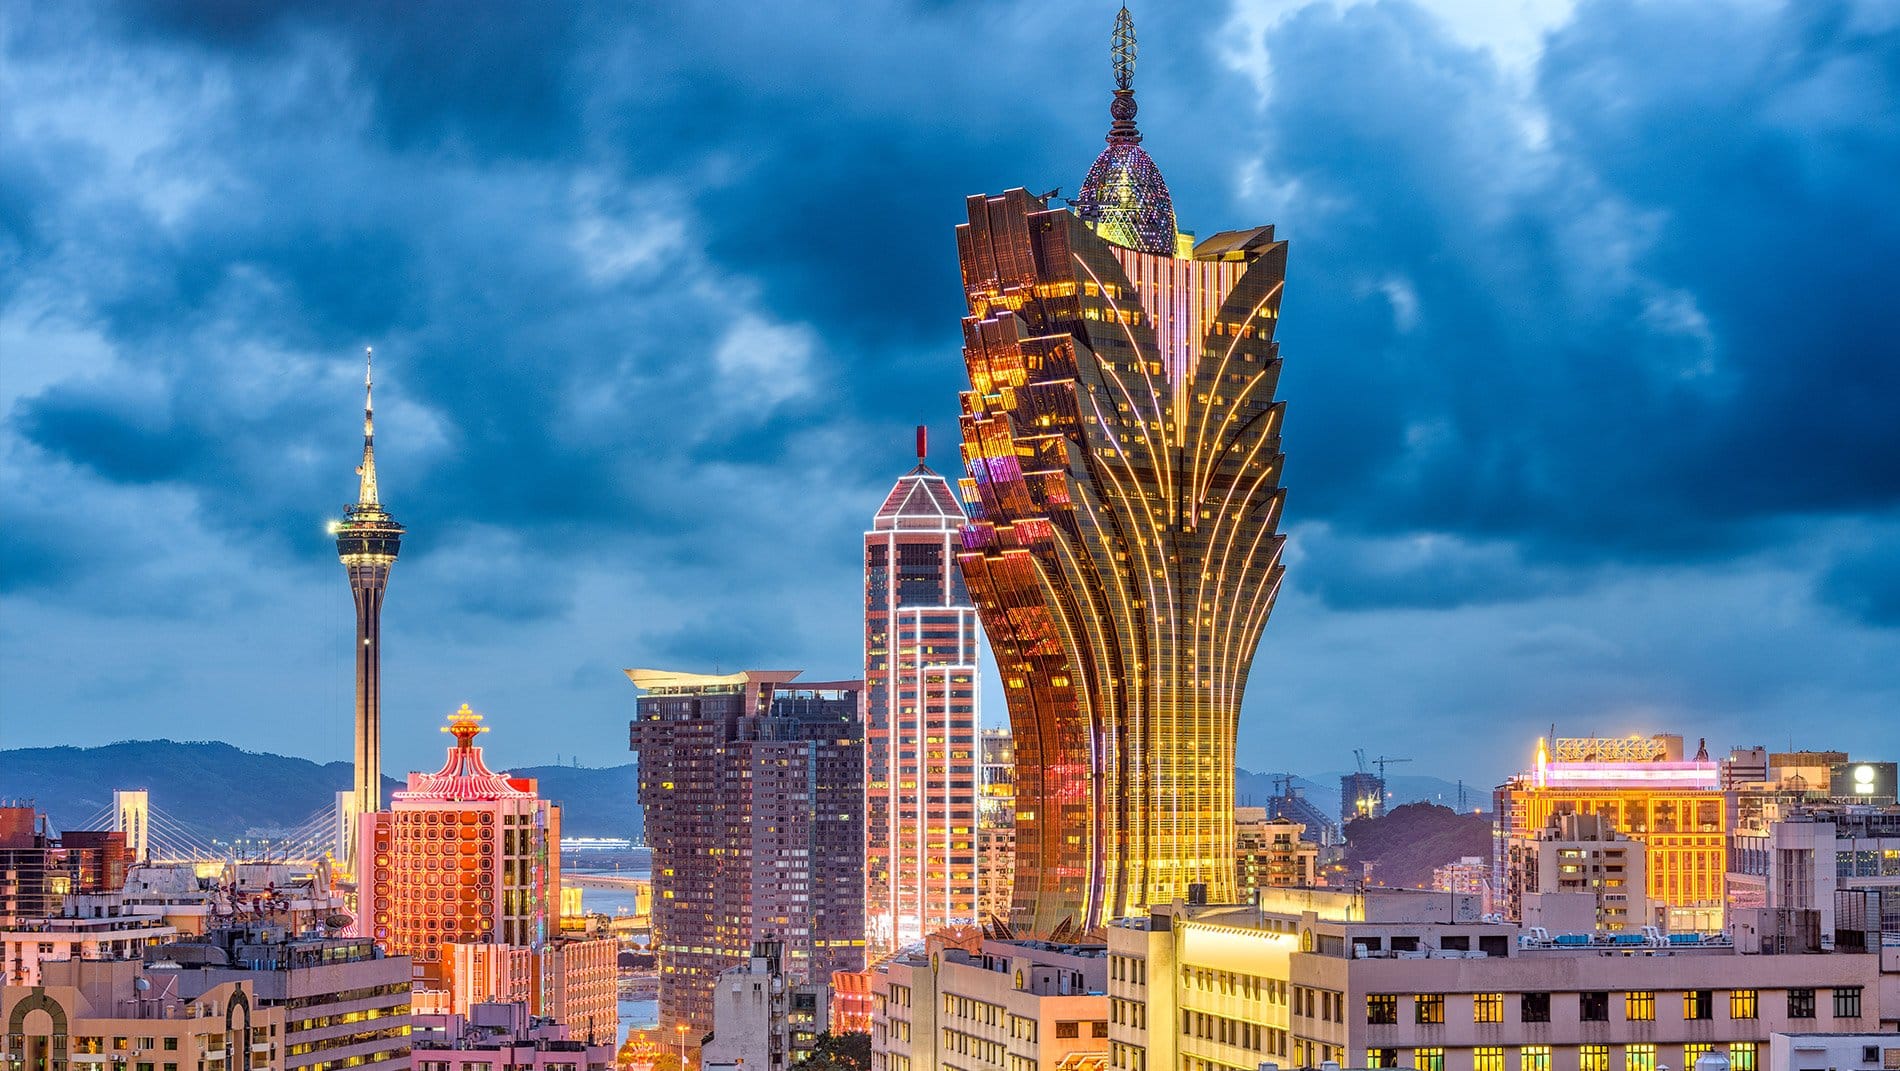 Casinos~The Grand Lisboa Hotel, in the center of this photograph, is the tallest and most distinctive hotel in Macau. It is the most recent of three casino buildings belonging to Stanley Ho, the original architect of the gaming scene in Macau.